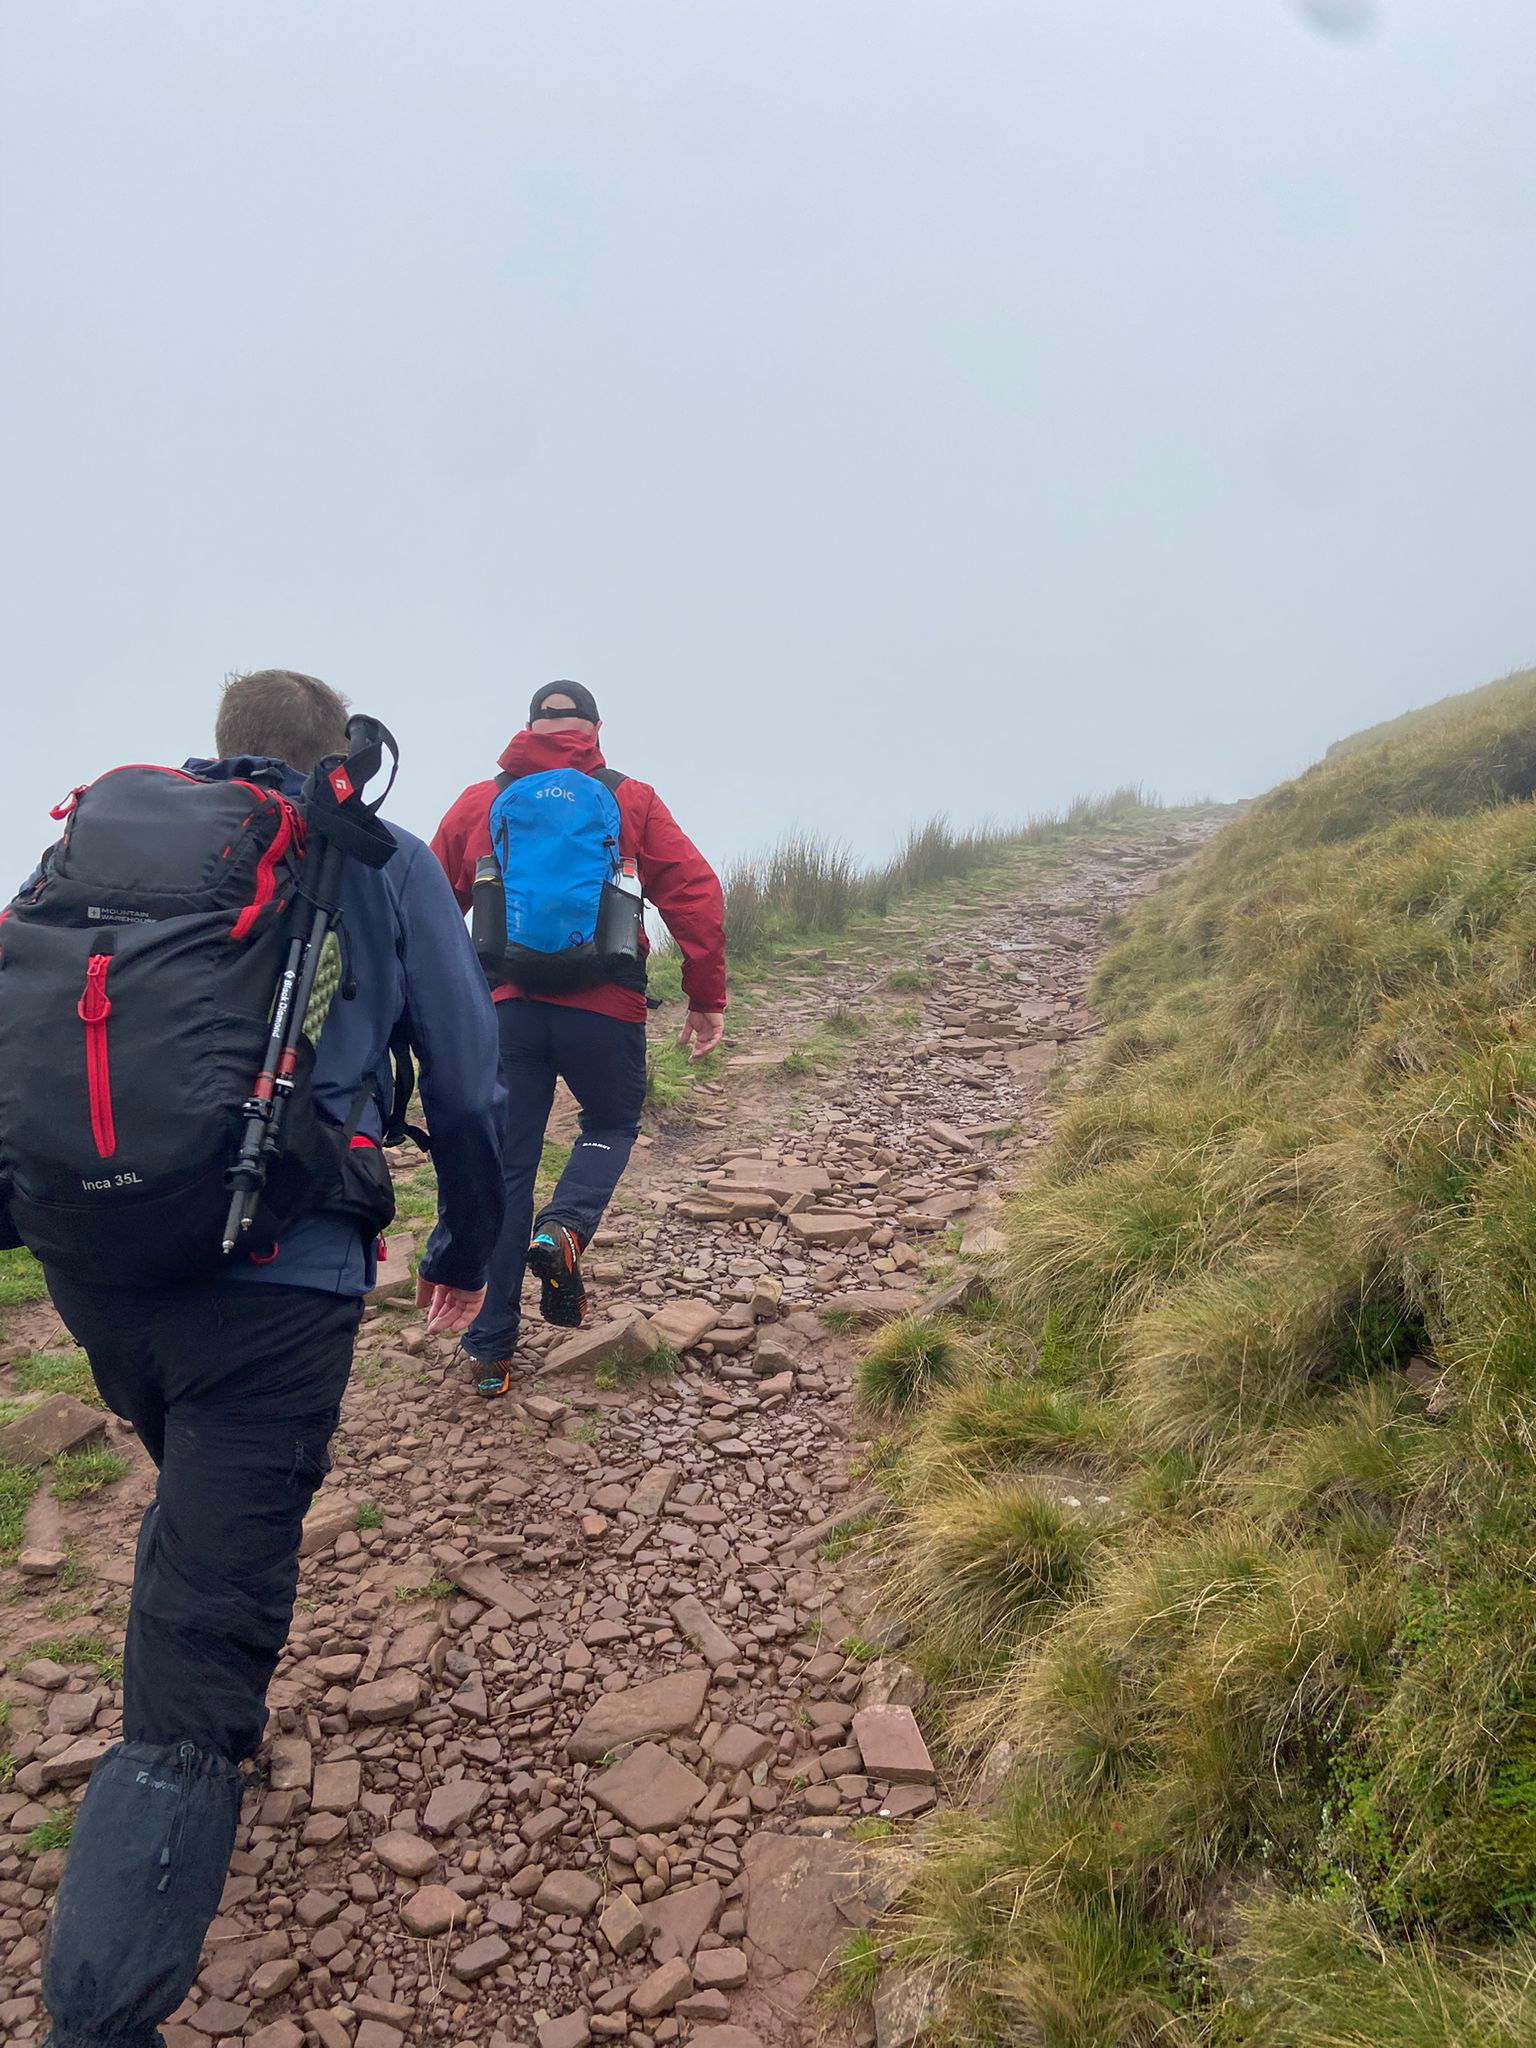 Beat The Beacons 2023, Beat The Beacons (BEAT) 2023 &#8211; 22 Mile Endurance Route &#8211; Highest points in the Brecon Beacons, Welsh Man Walking